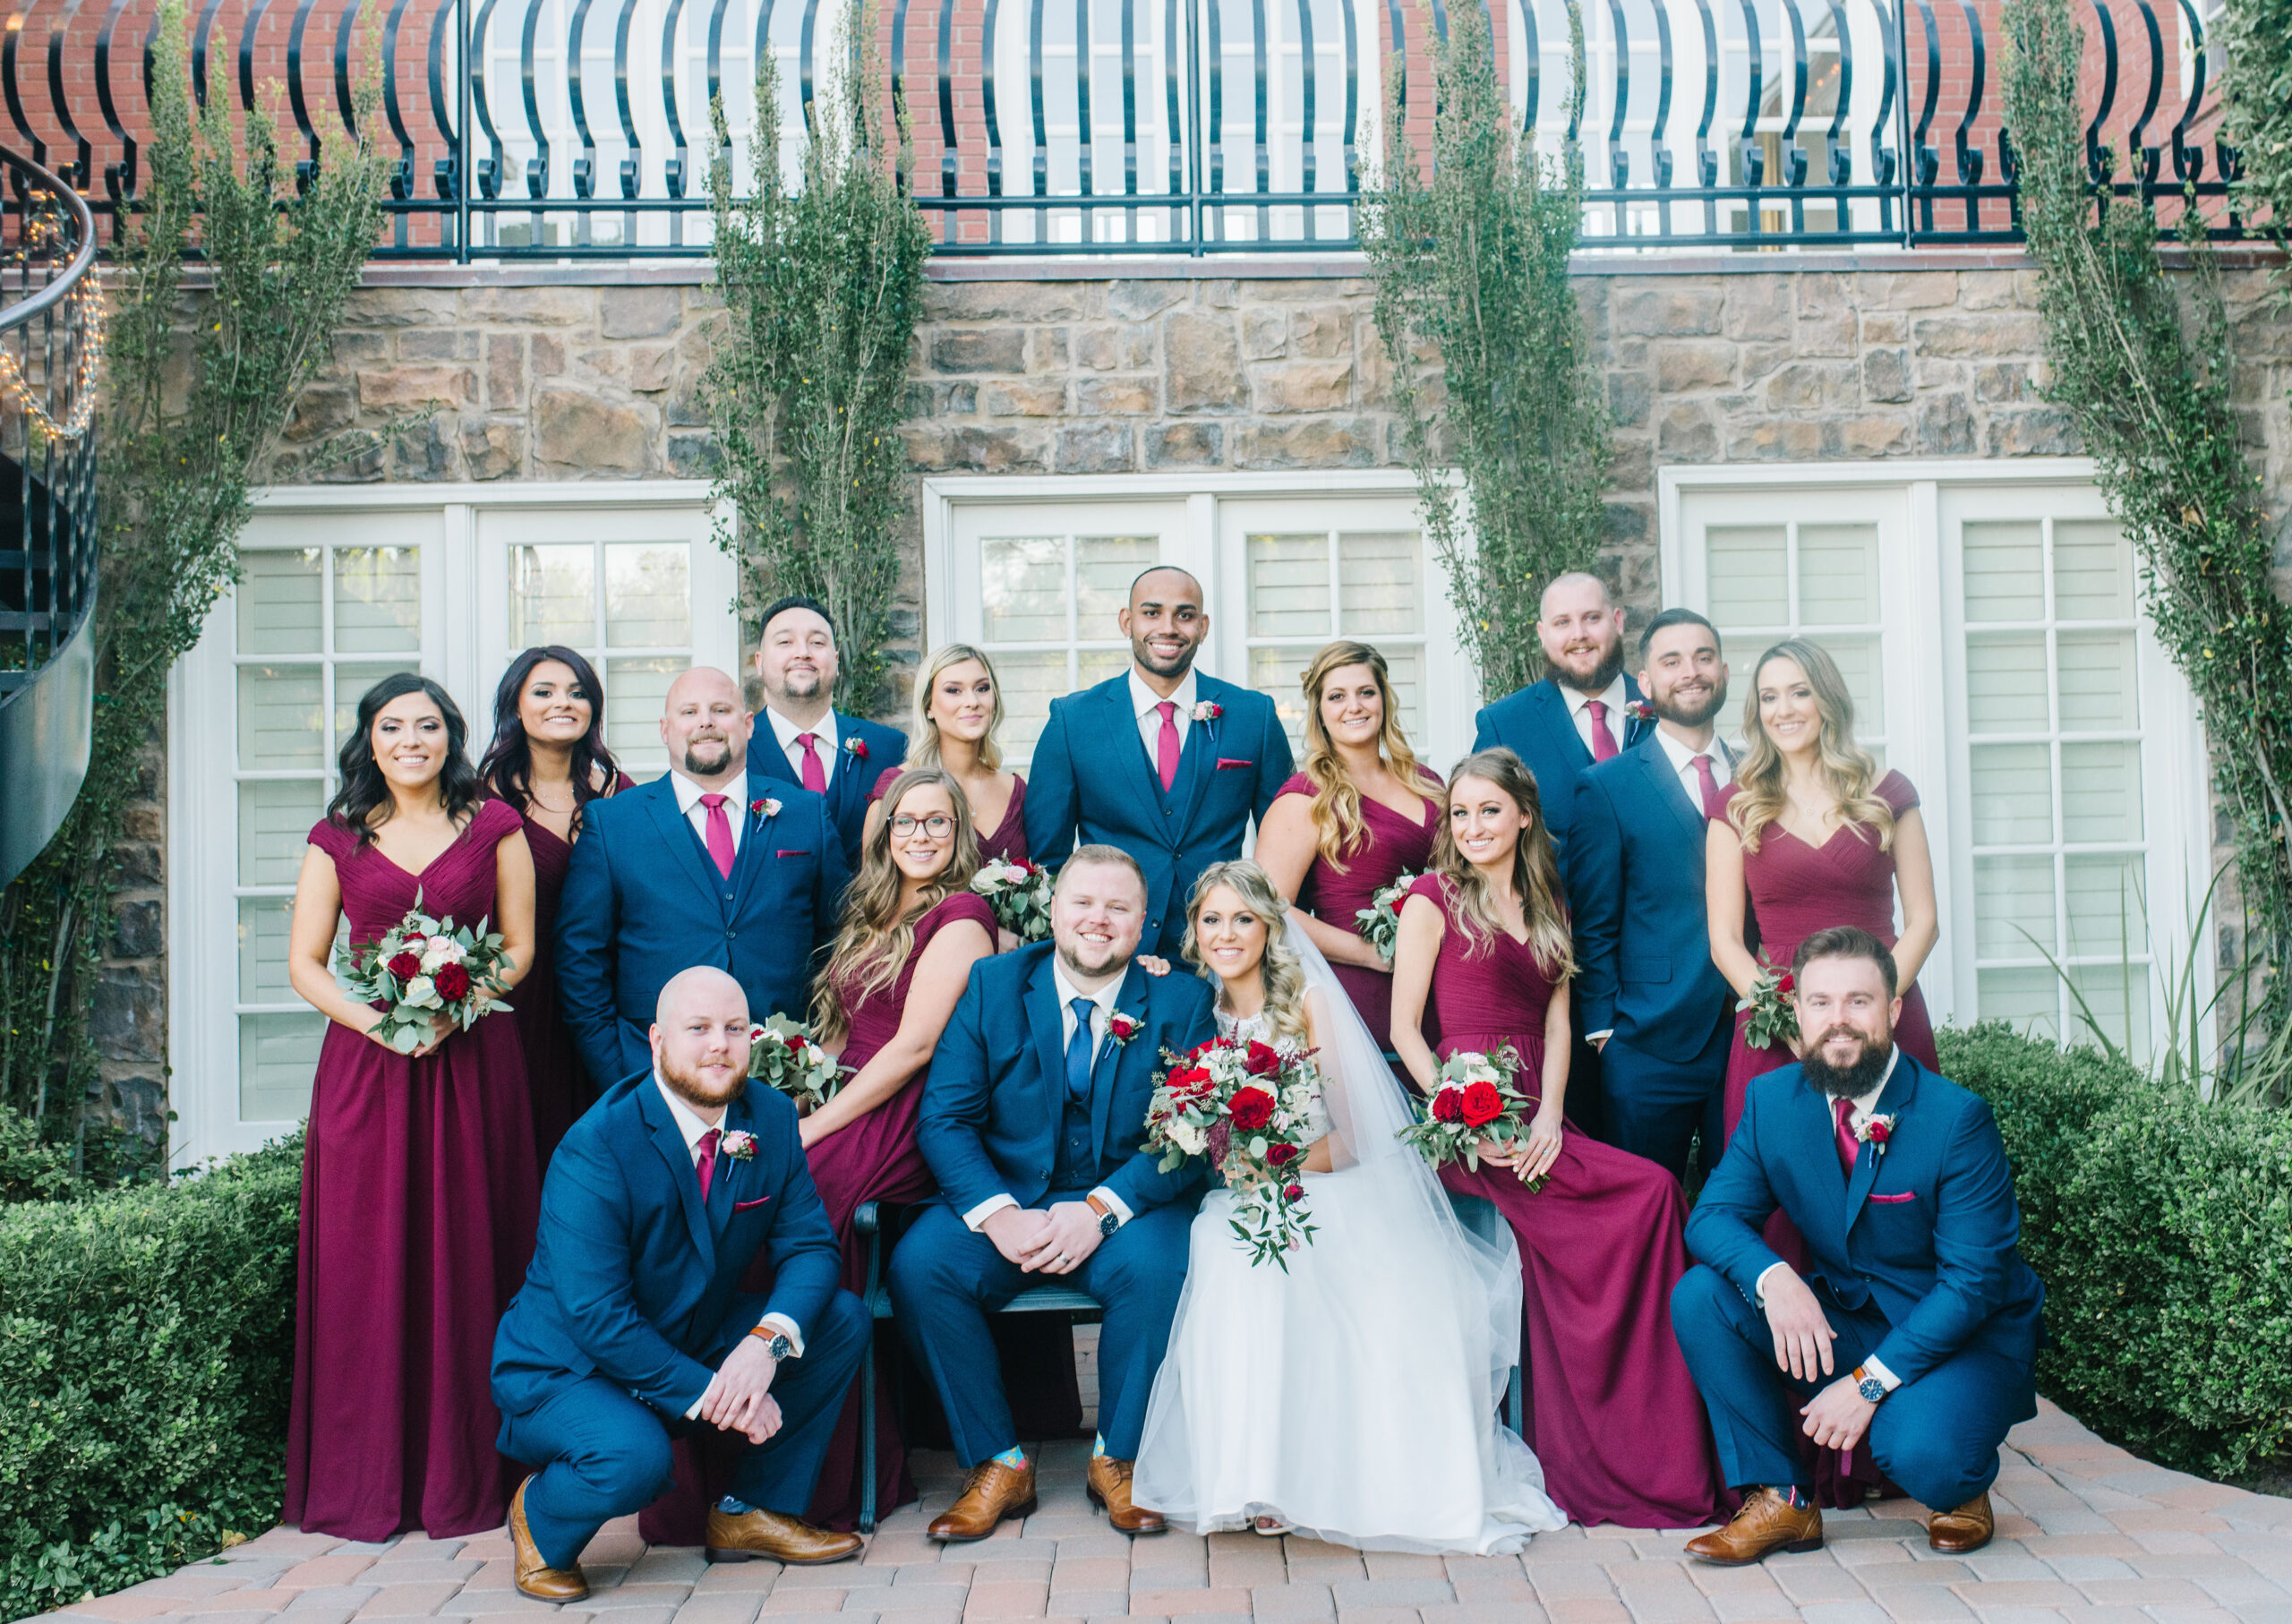 A bridal party surrounding the bride and groom wearing fall wedding colors